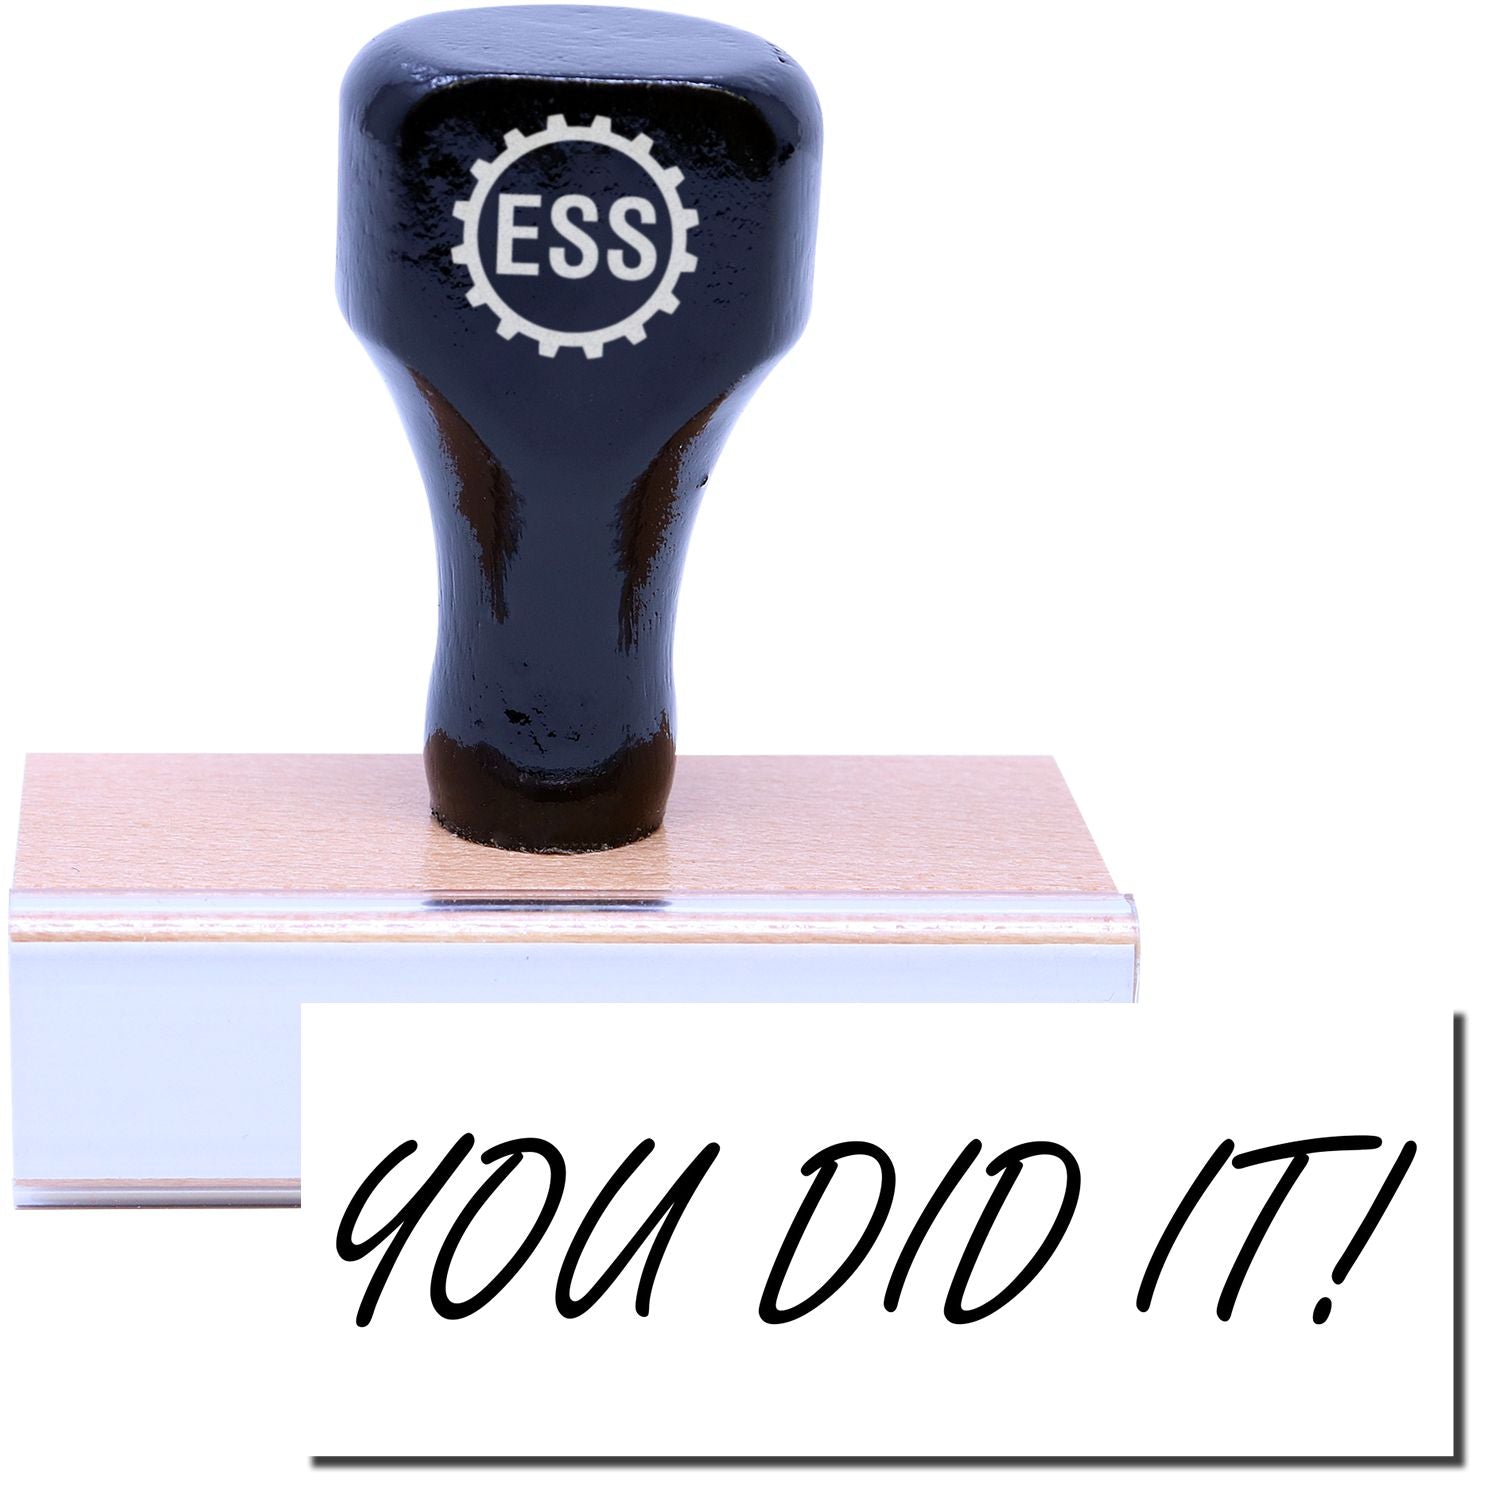 A stock office rubber stamp with a stamped image showing how the text "YOU DID IT!" in a large font is displayed after stamping.